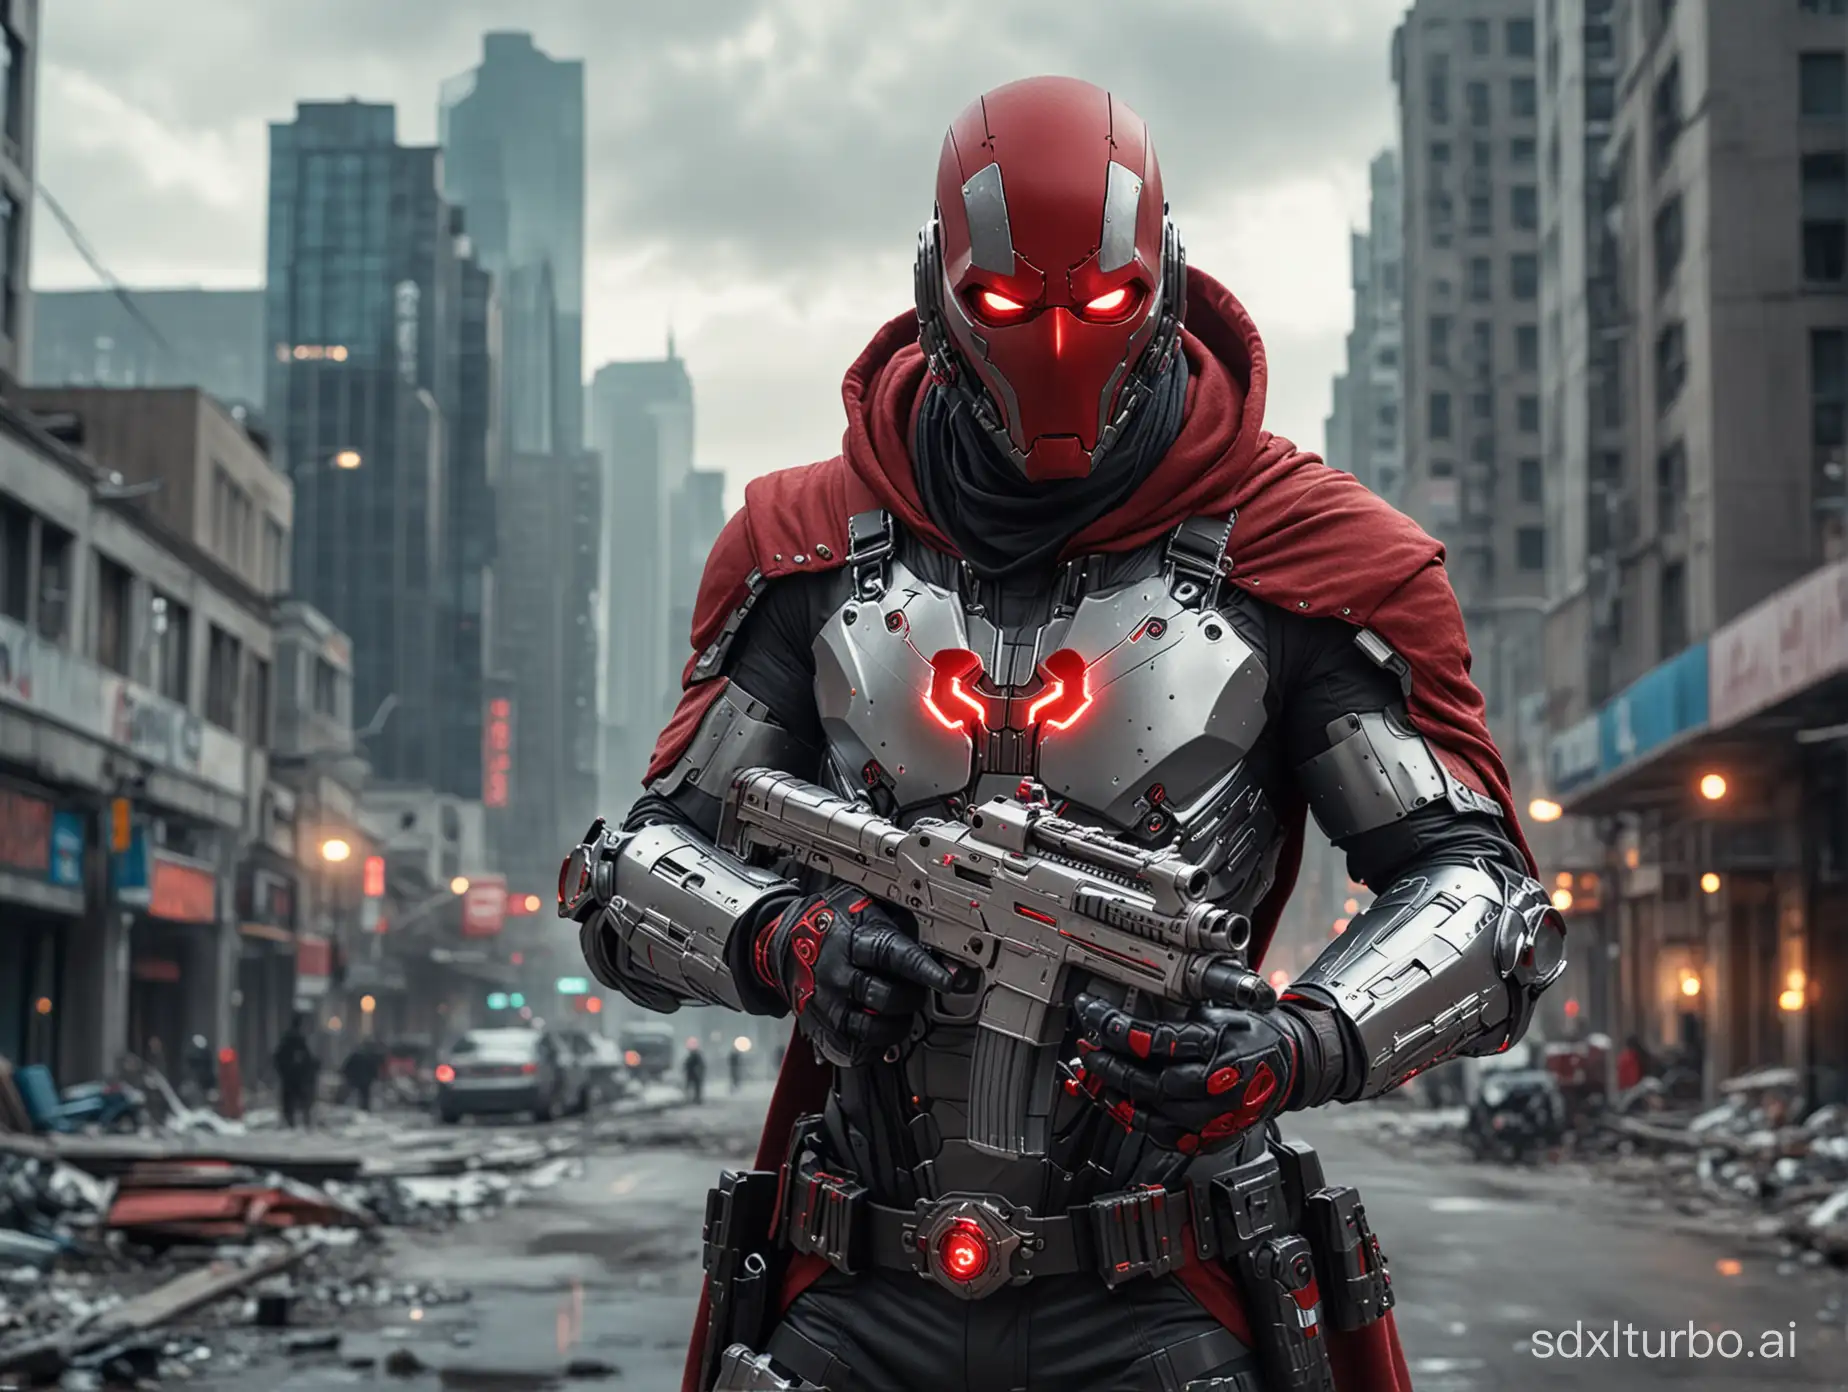 cinematic picture of a cyborg warrior in silver and red outfit, wearing a red mask, a red hood, have a laser gun attached on his hand, standing in the heart of a city